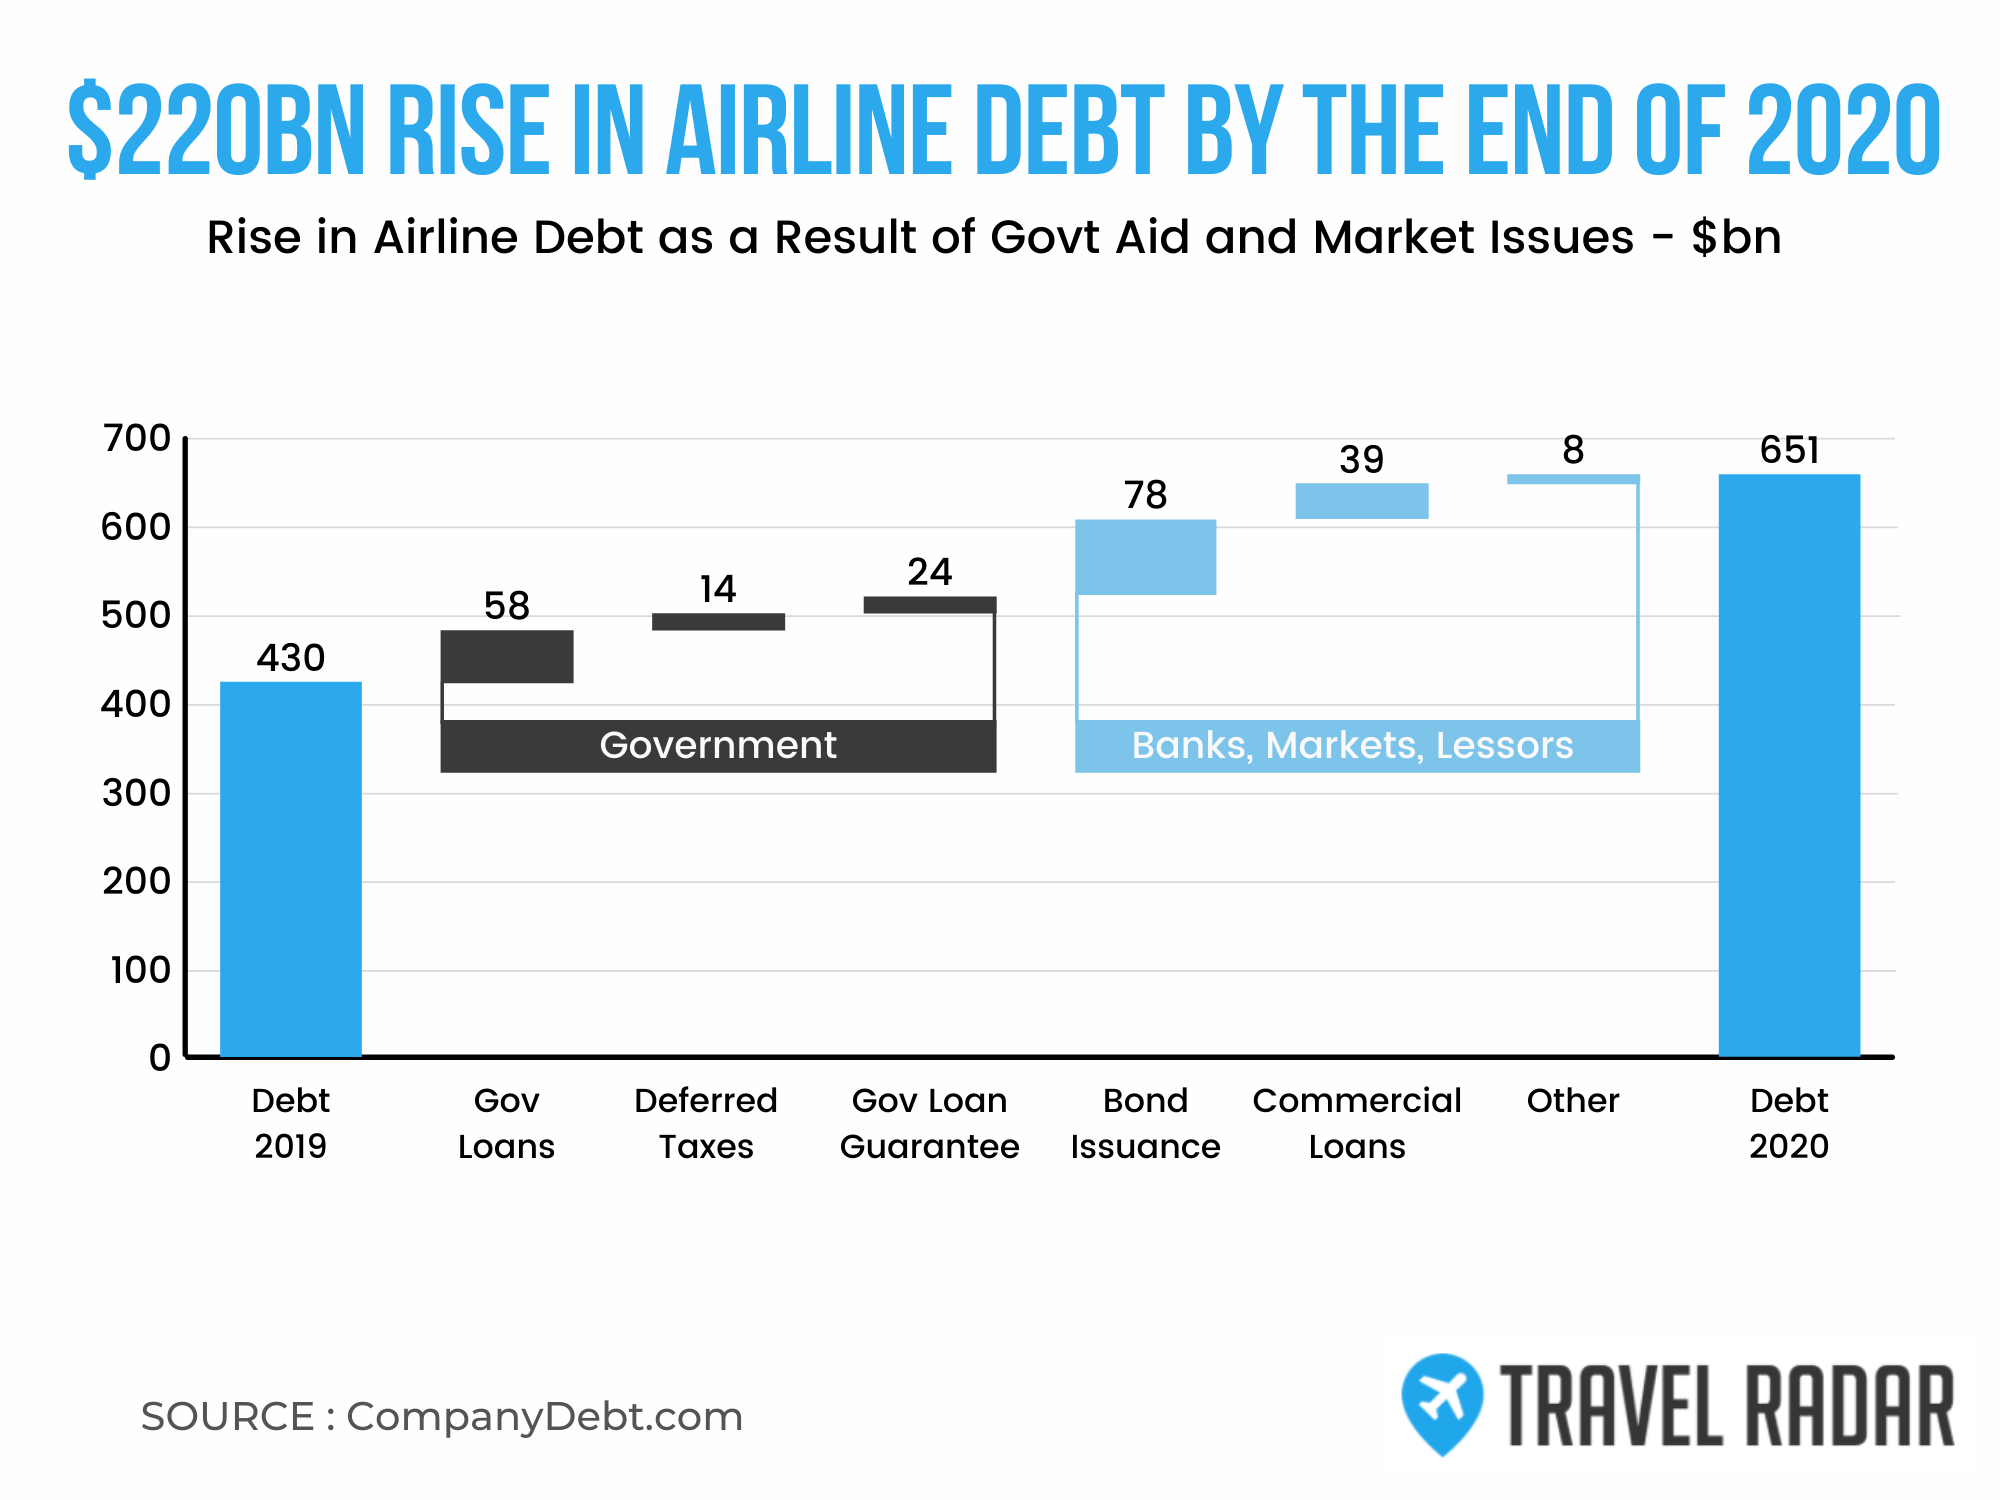 Airlines Brace For A ‘Longer And Deeper’ Crisis In 2021 Travel Radar